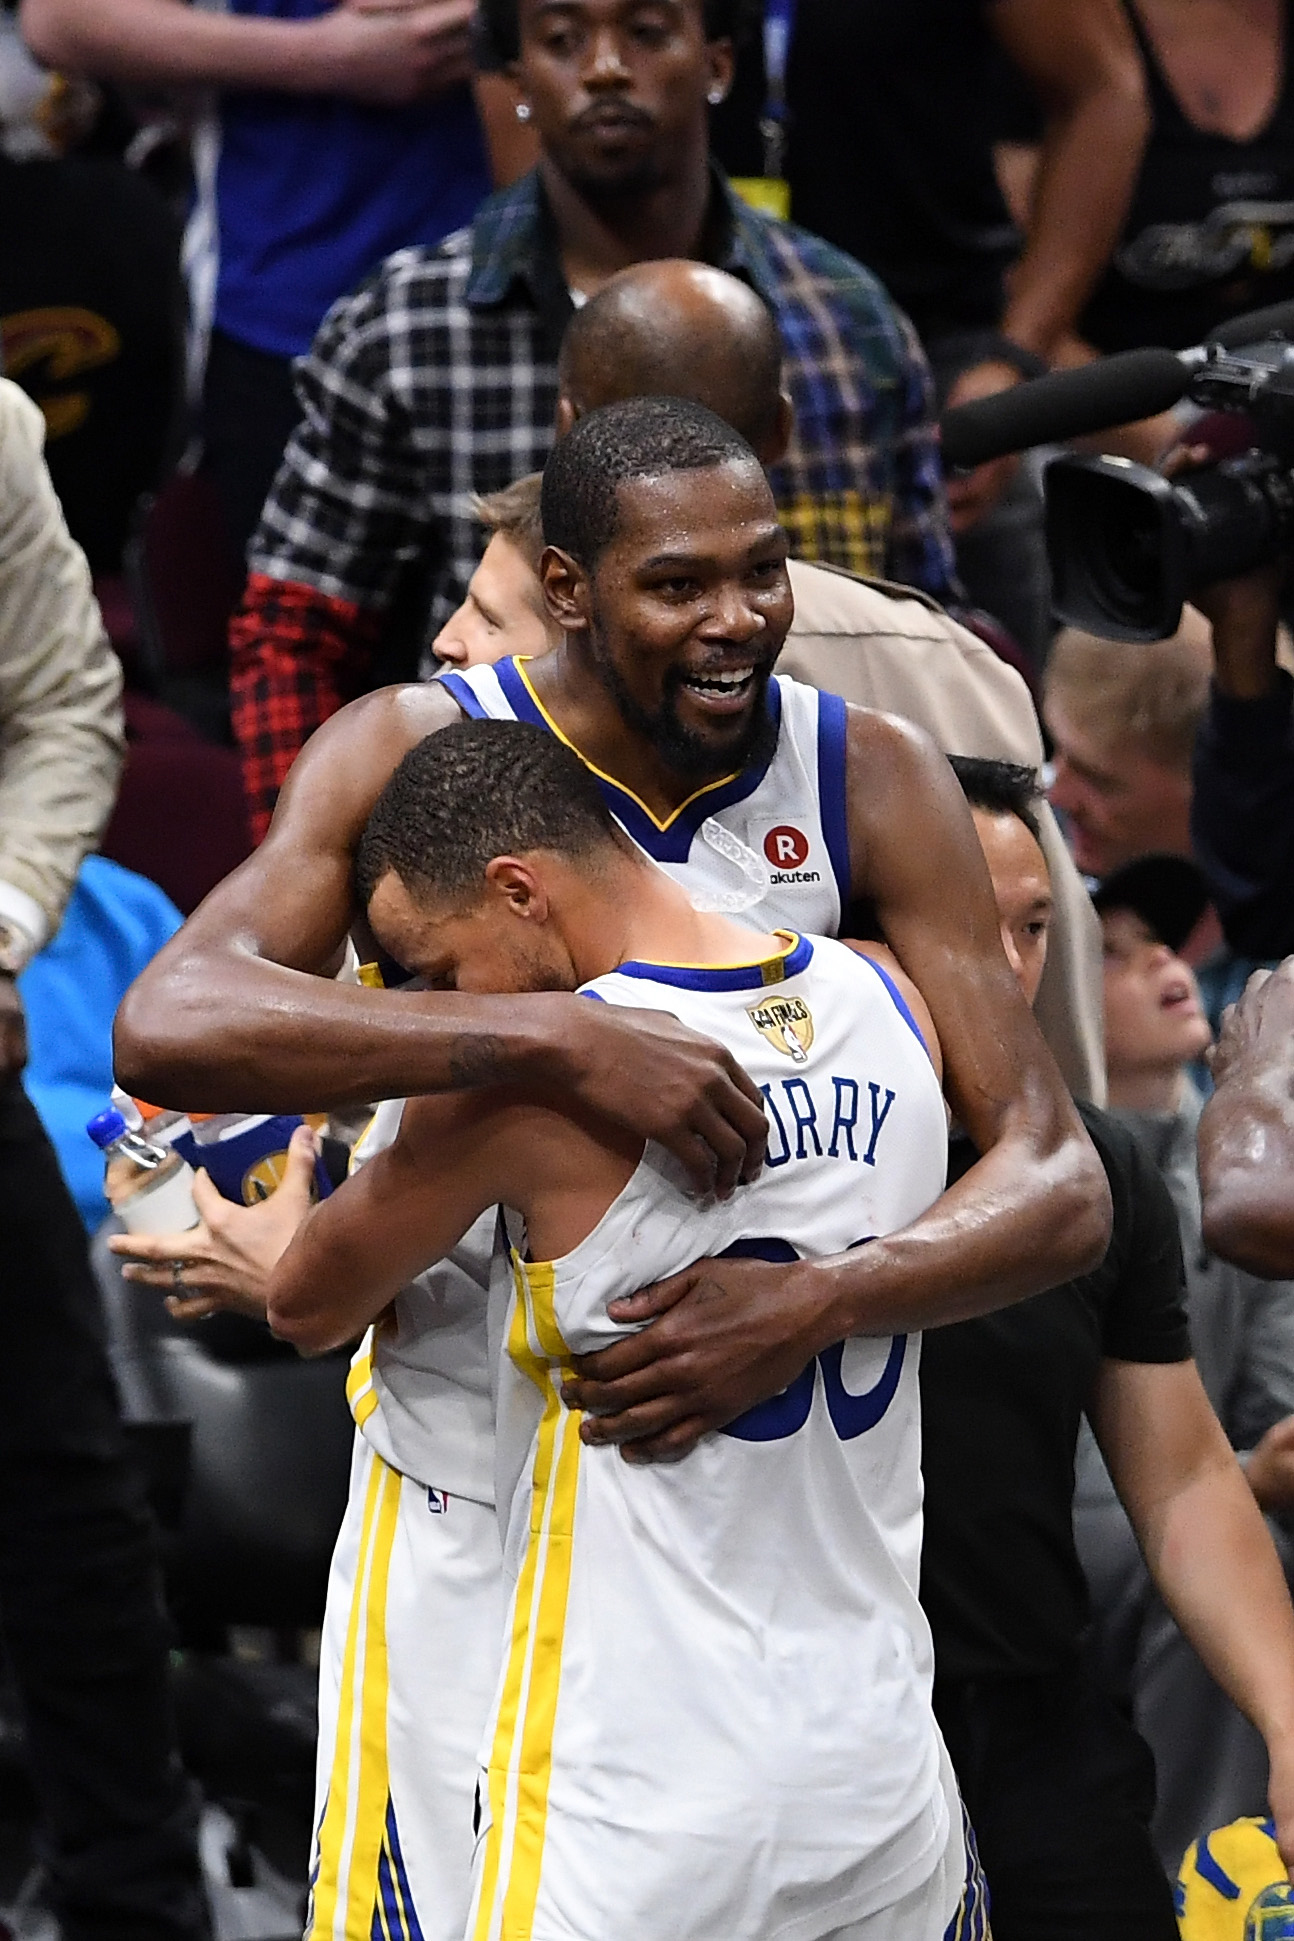 PHOTO: Stephen Curry #30 and Kevin Durant #35 of the Golden State Warriors celebrate late in the game against the Cleveland Cavaliers during the 2018 NBA Finals at Quicken Loans Arena on June 8, 2018 in Cleveland, Ohio.